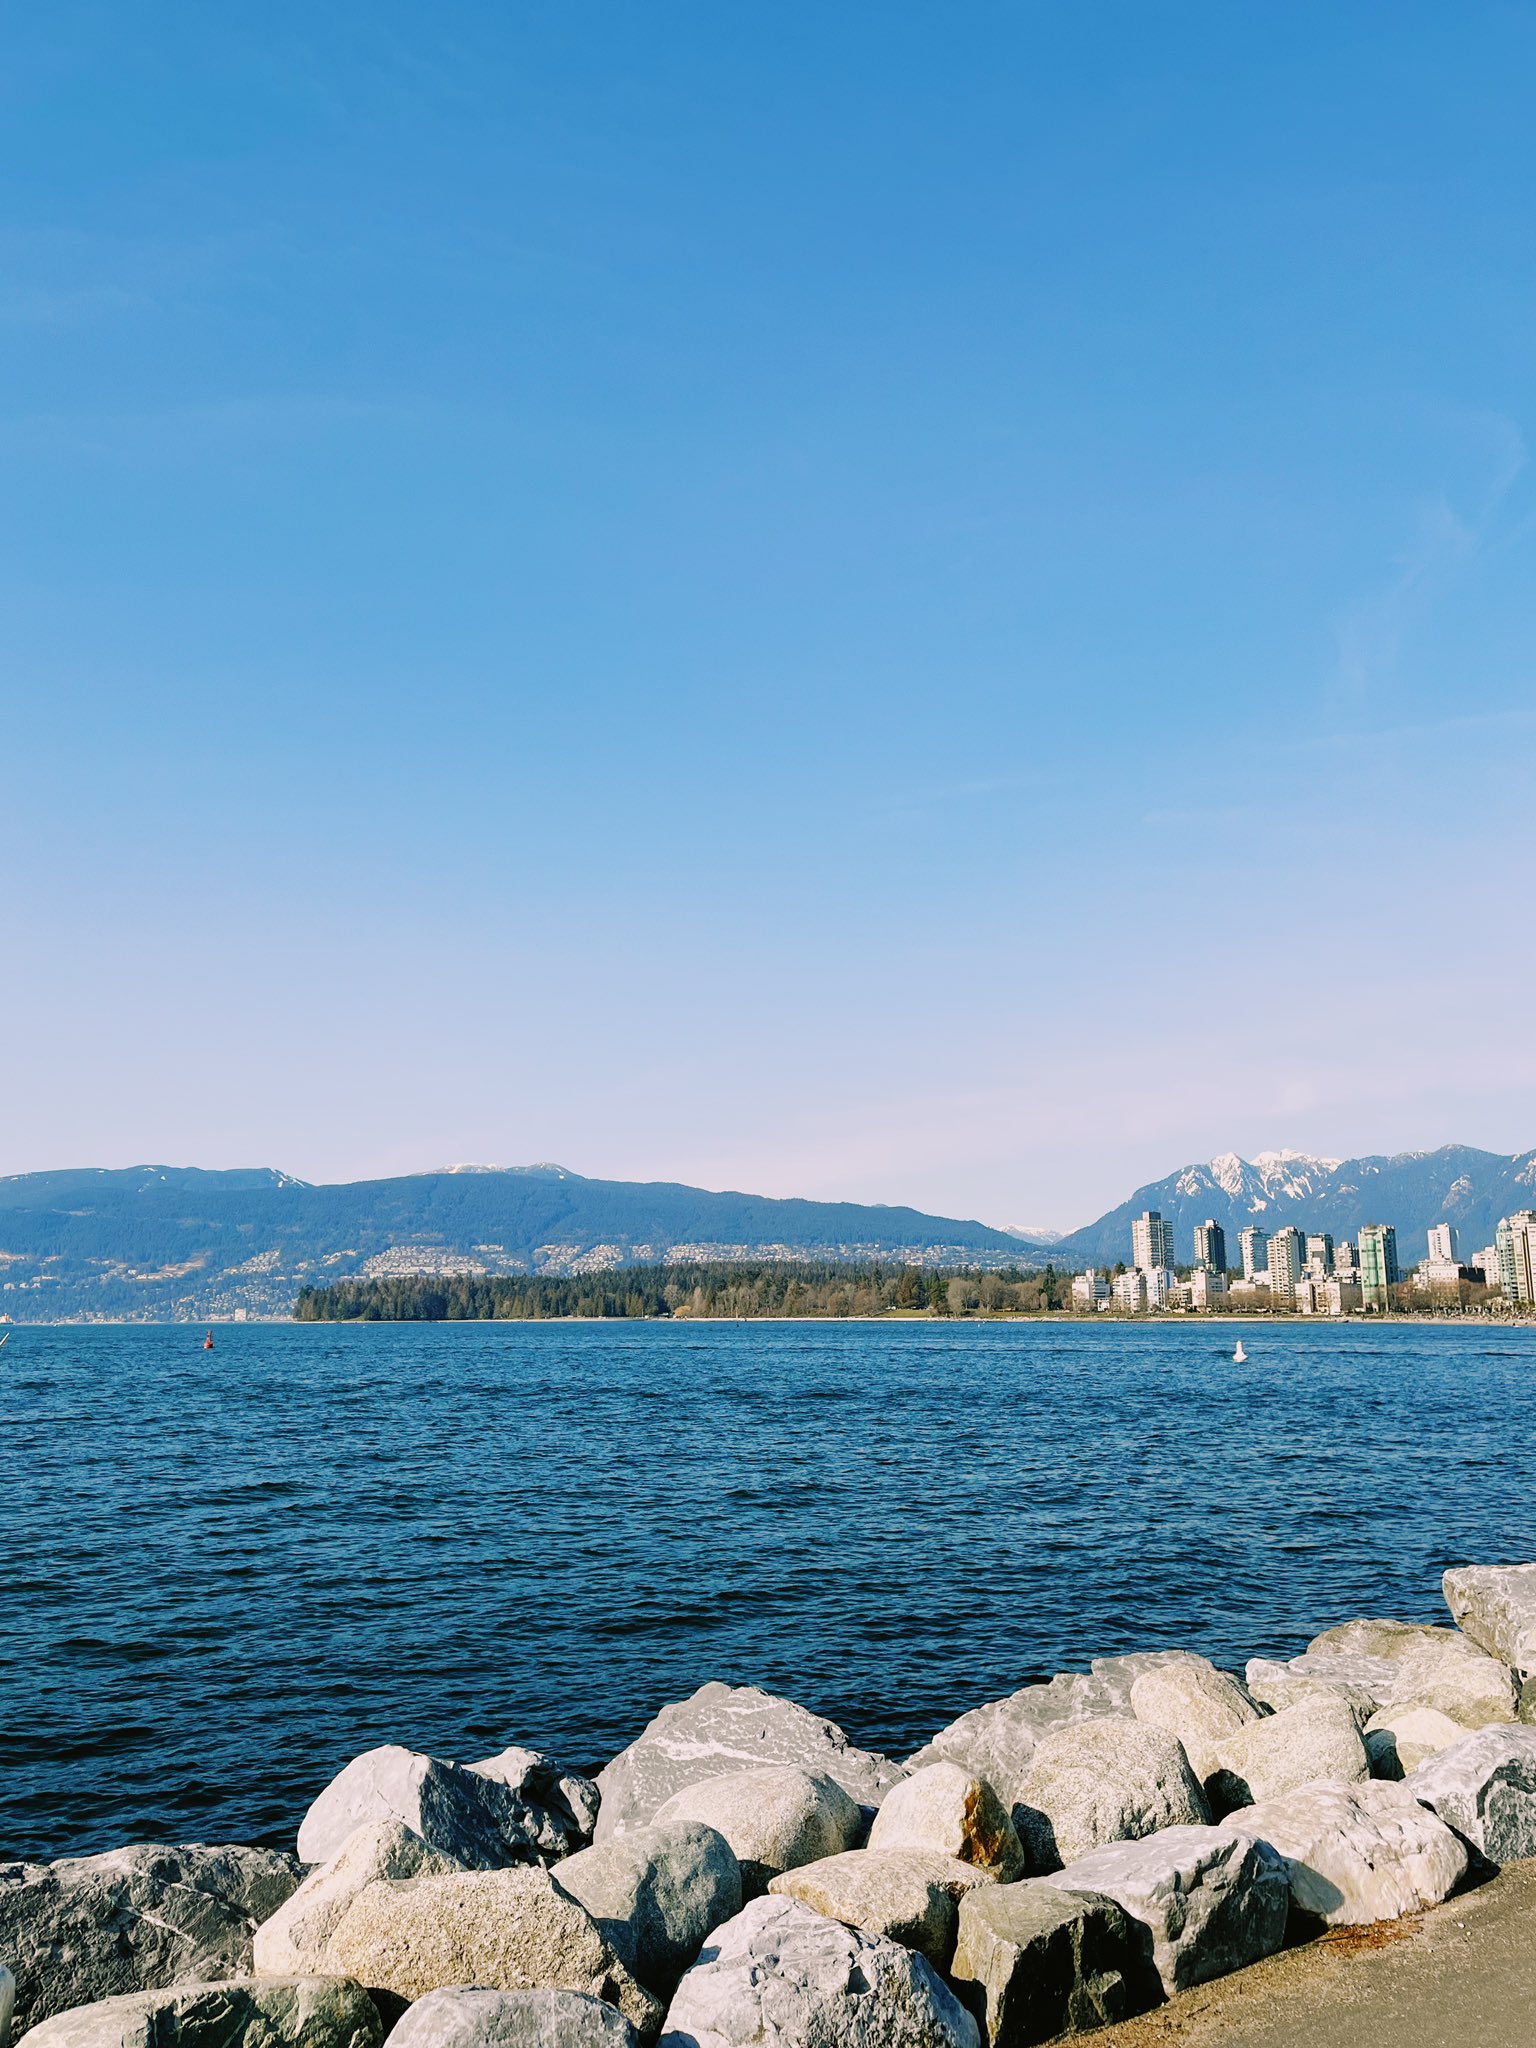 Water and mountains skyline in Vancouver on a sunny day.